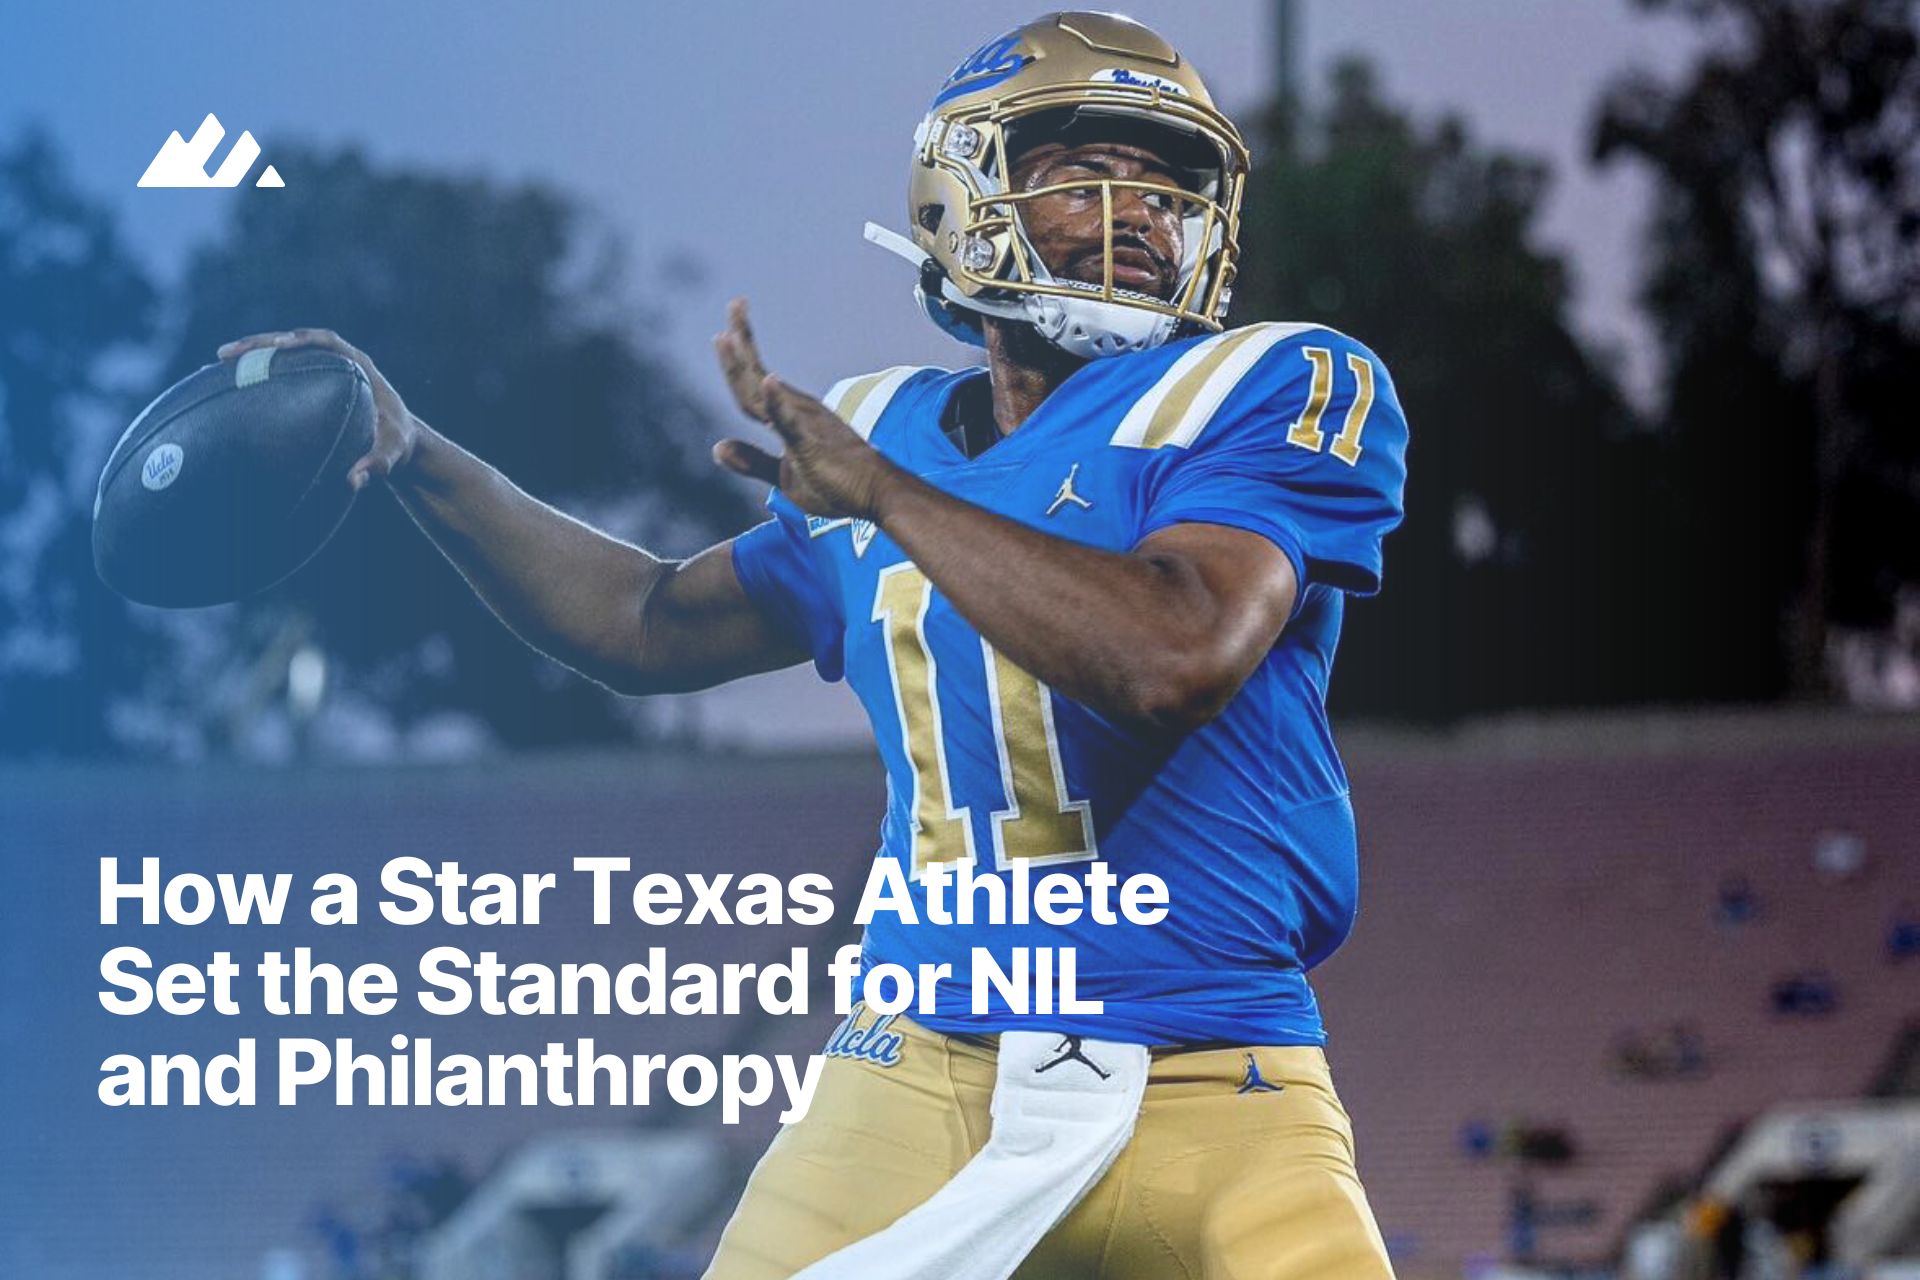 NIL for Good: How a Star Texas Athlete Set the Standard for NIL and Philanthropy